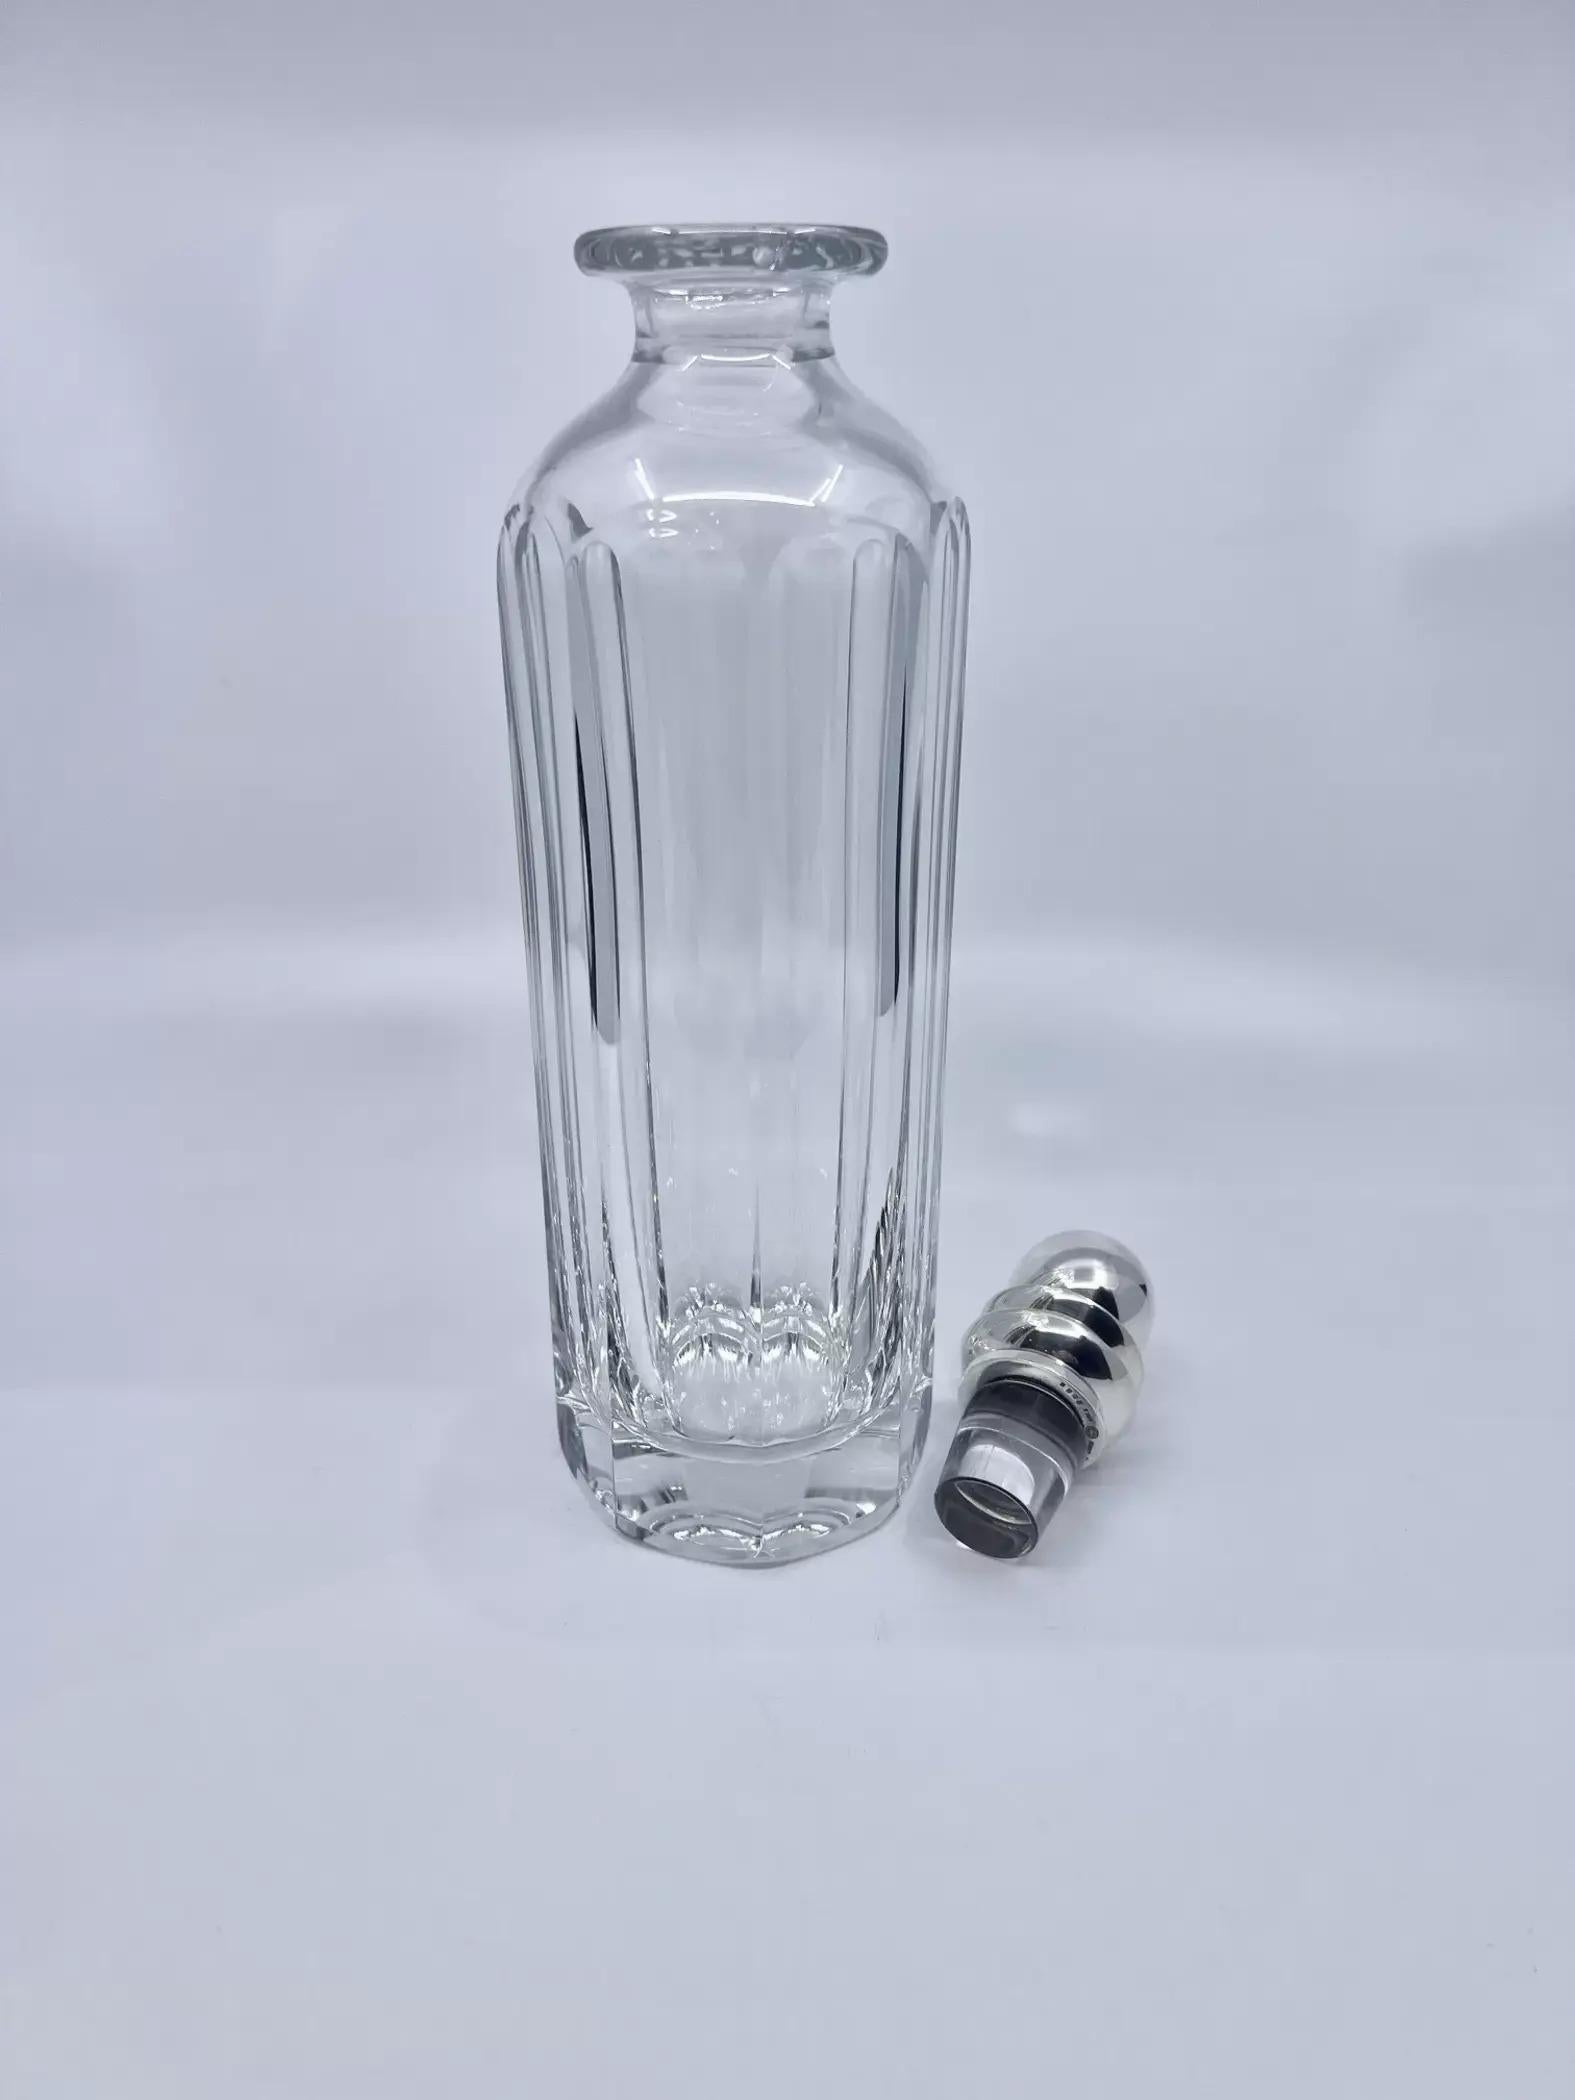 A vintage Baccarat crystal decanter with sterling silver Georg Jensen stopper in the Pyramid pattern, design #206 by Harald Nielsen from circa 1935. There is a minor chip on the inner side of the rim, which is not viable when the stopper is